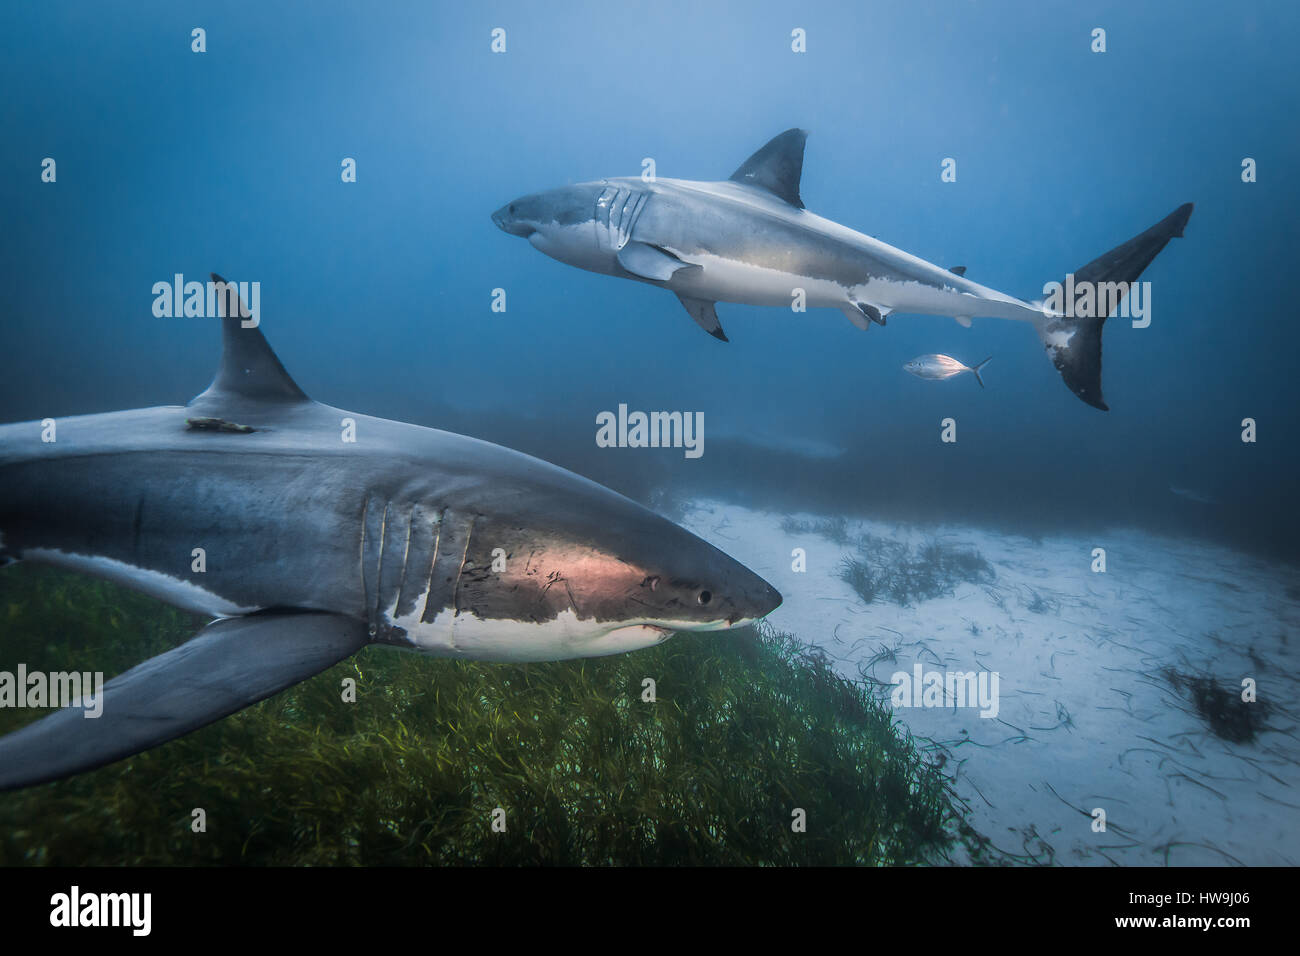 Grand requin blanc (Carcharodon carcharias) Banque D'Images